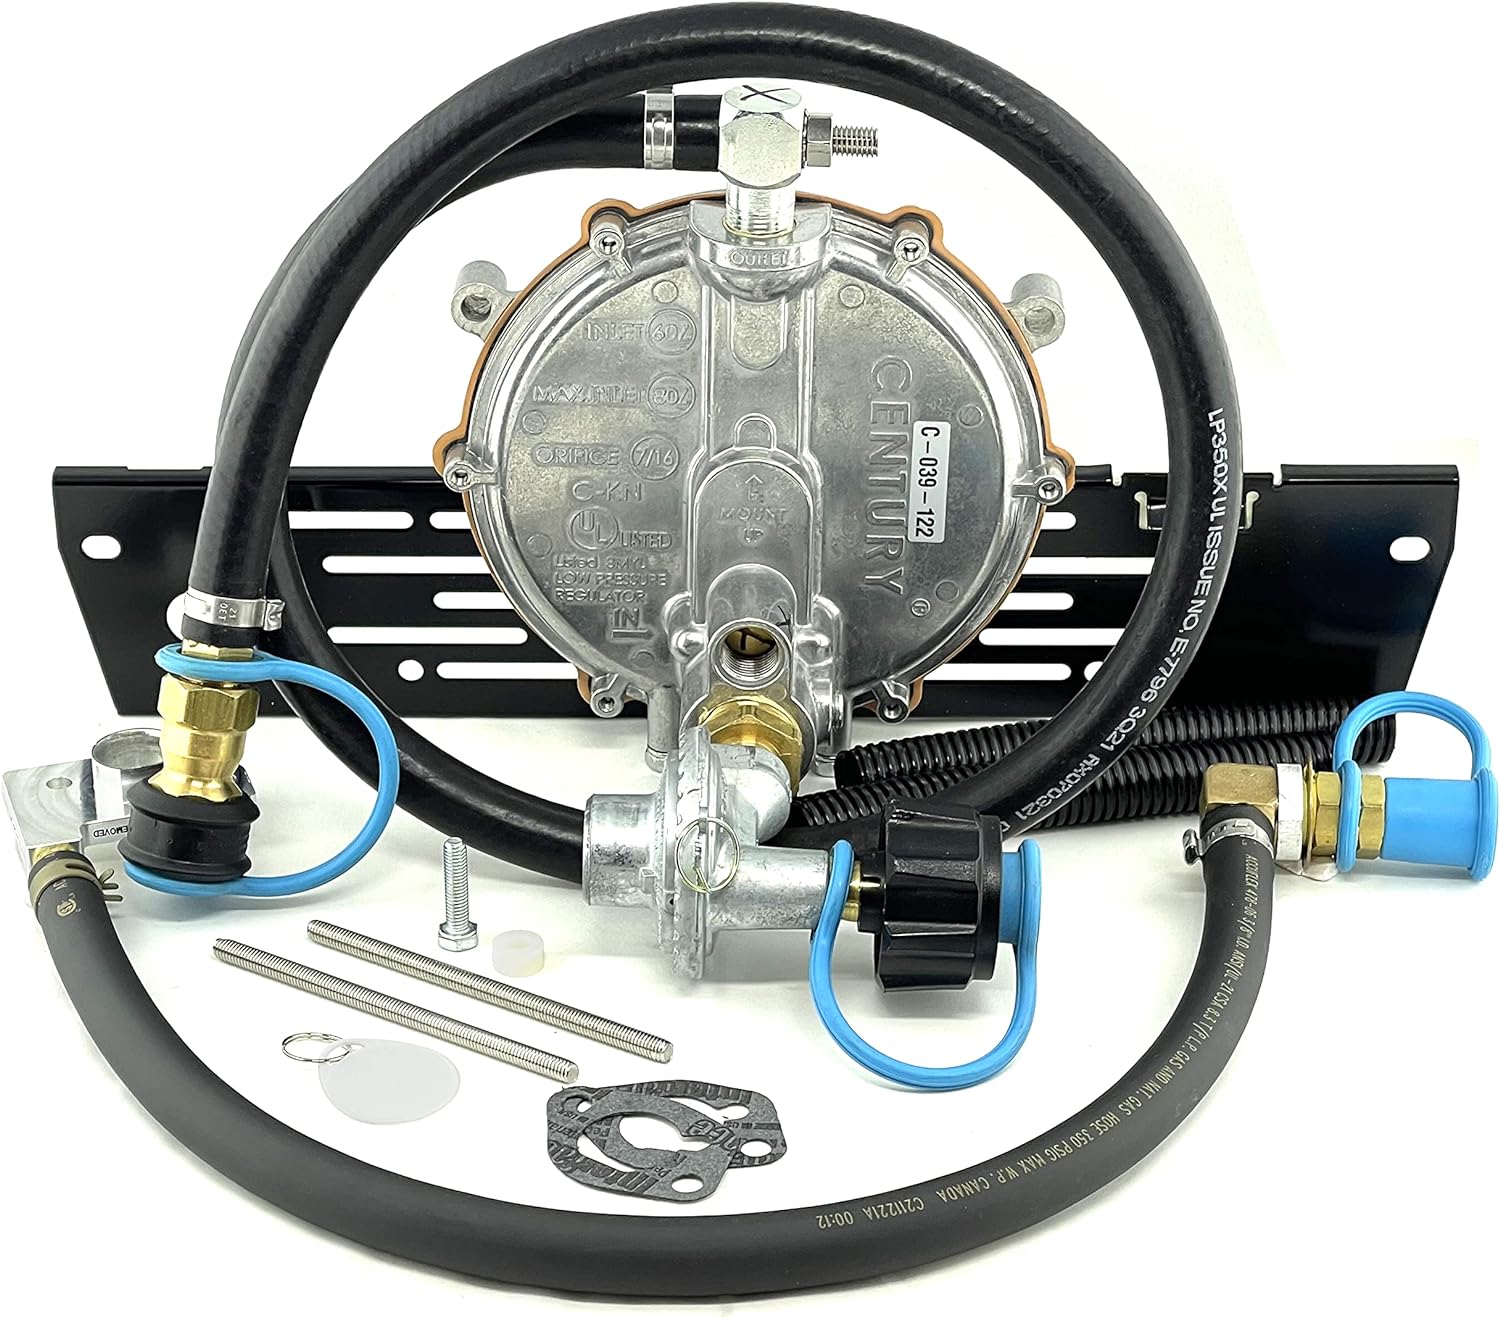 Grenergy EU3000is Propane Conversion Kit Review